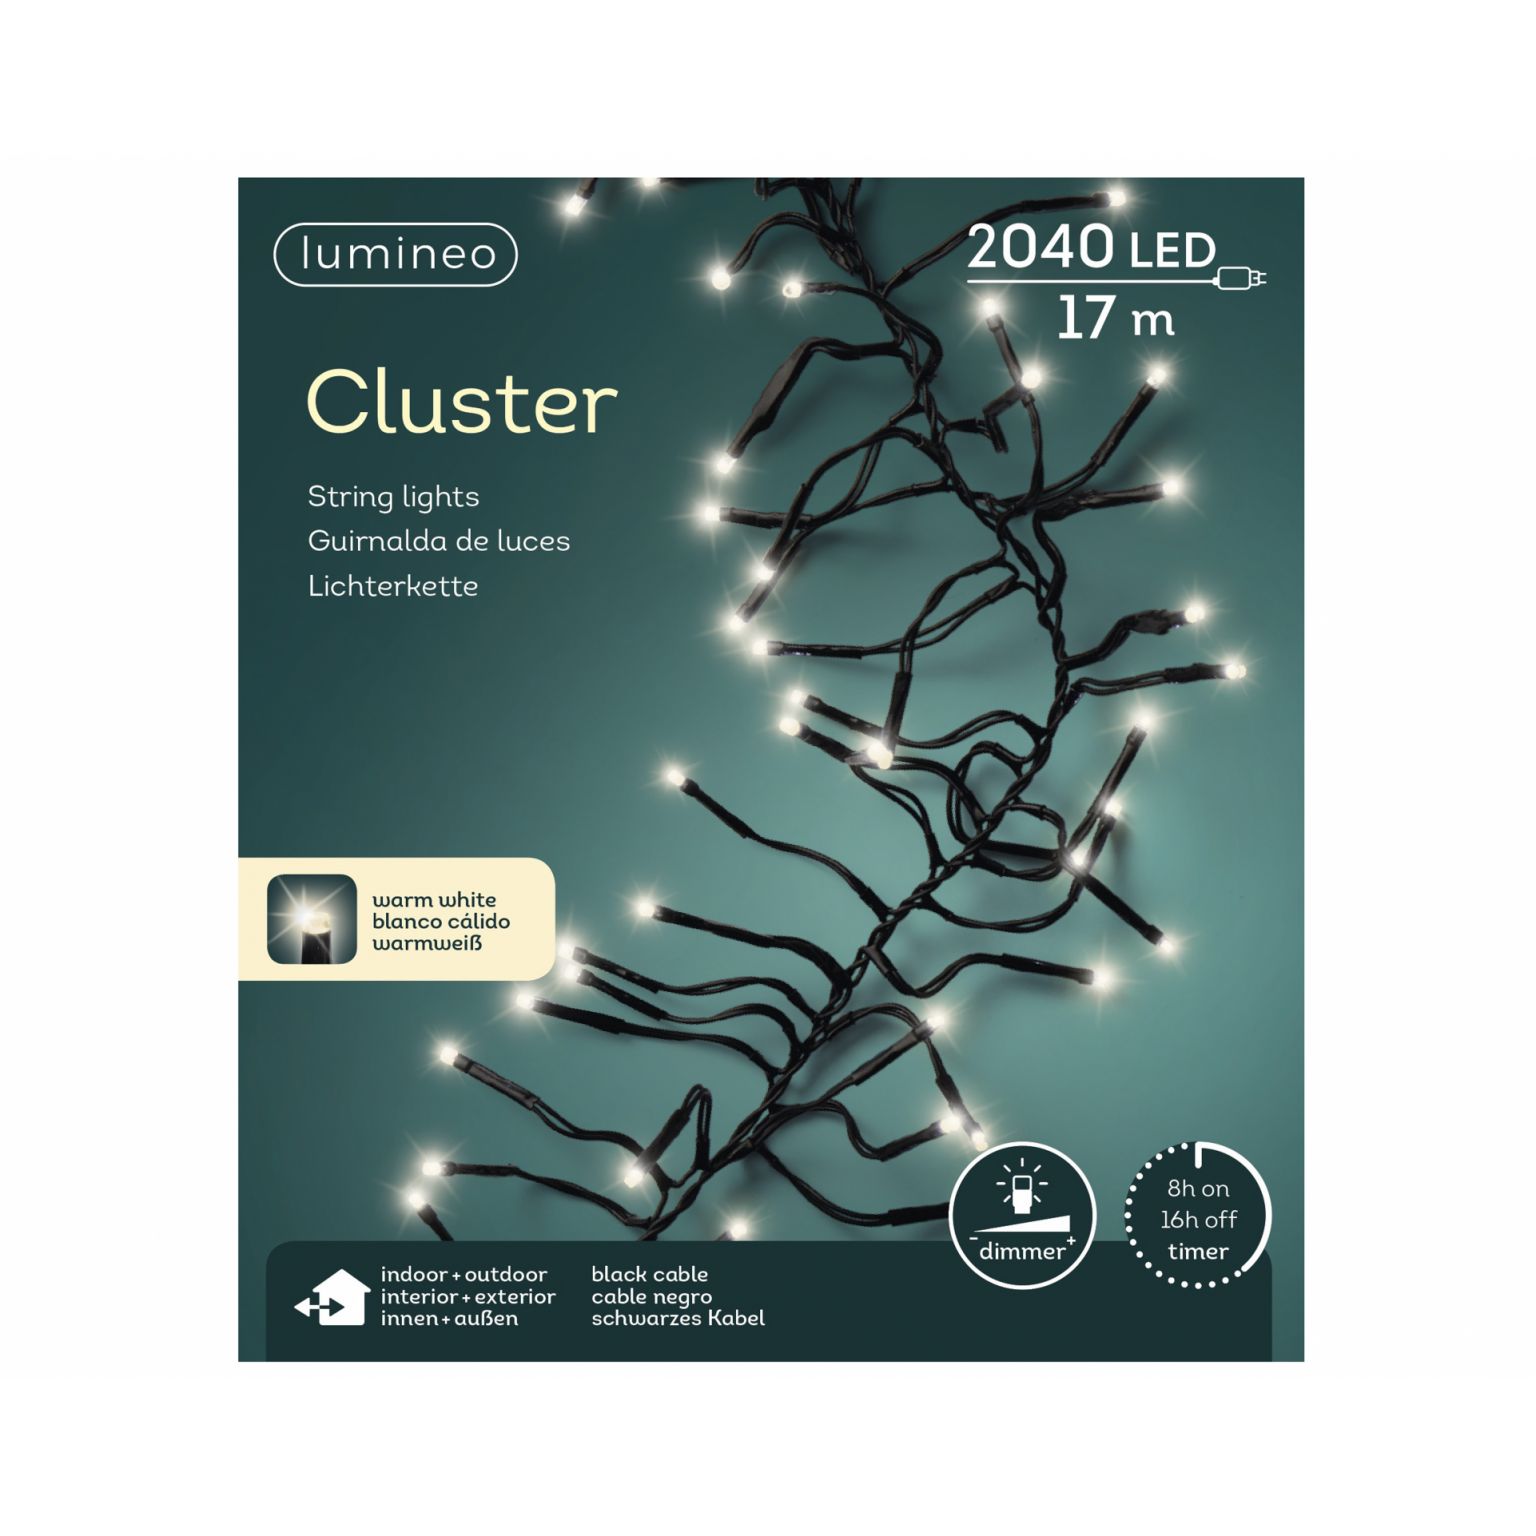 Clusterverlichting lumineo 2040-lamps LED 'warm wit'